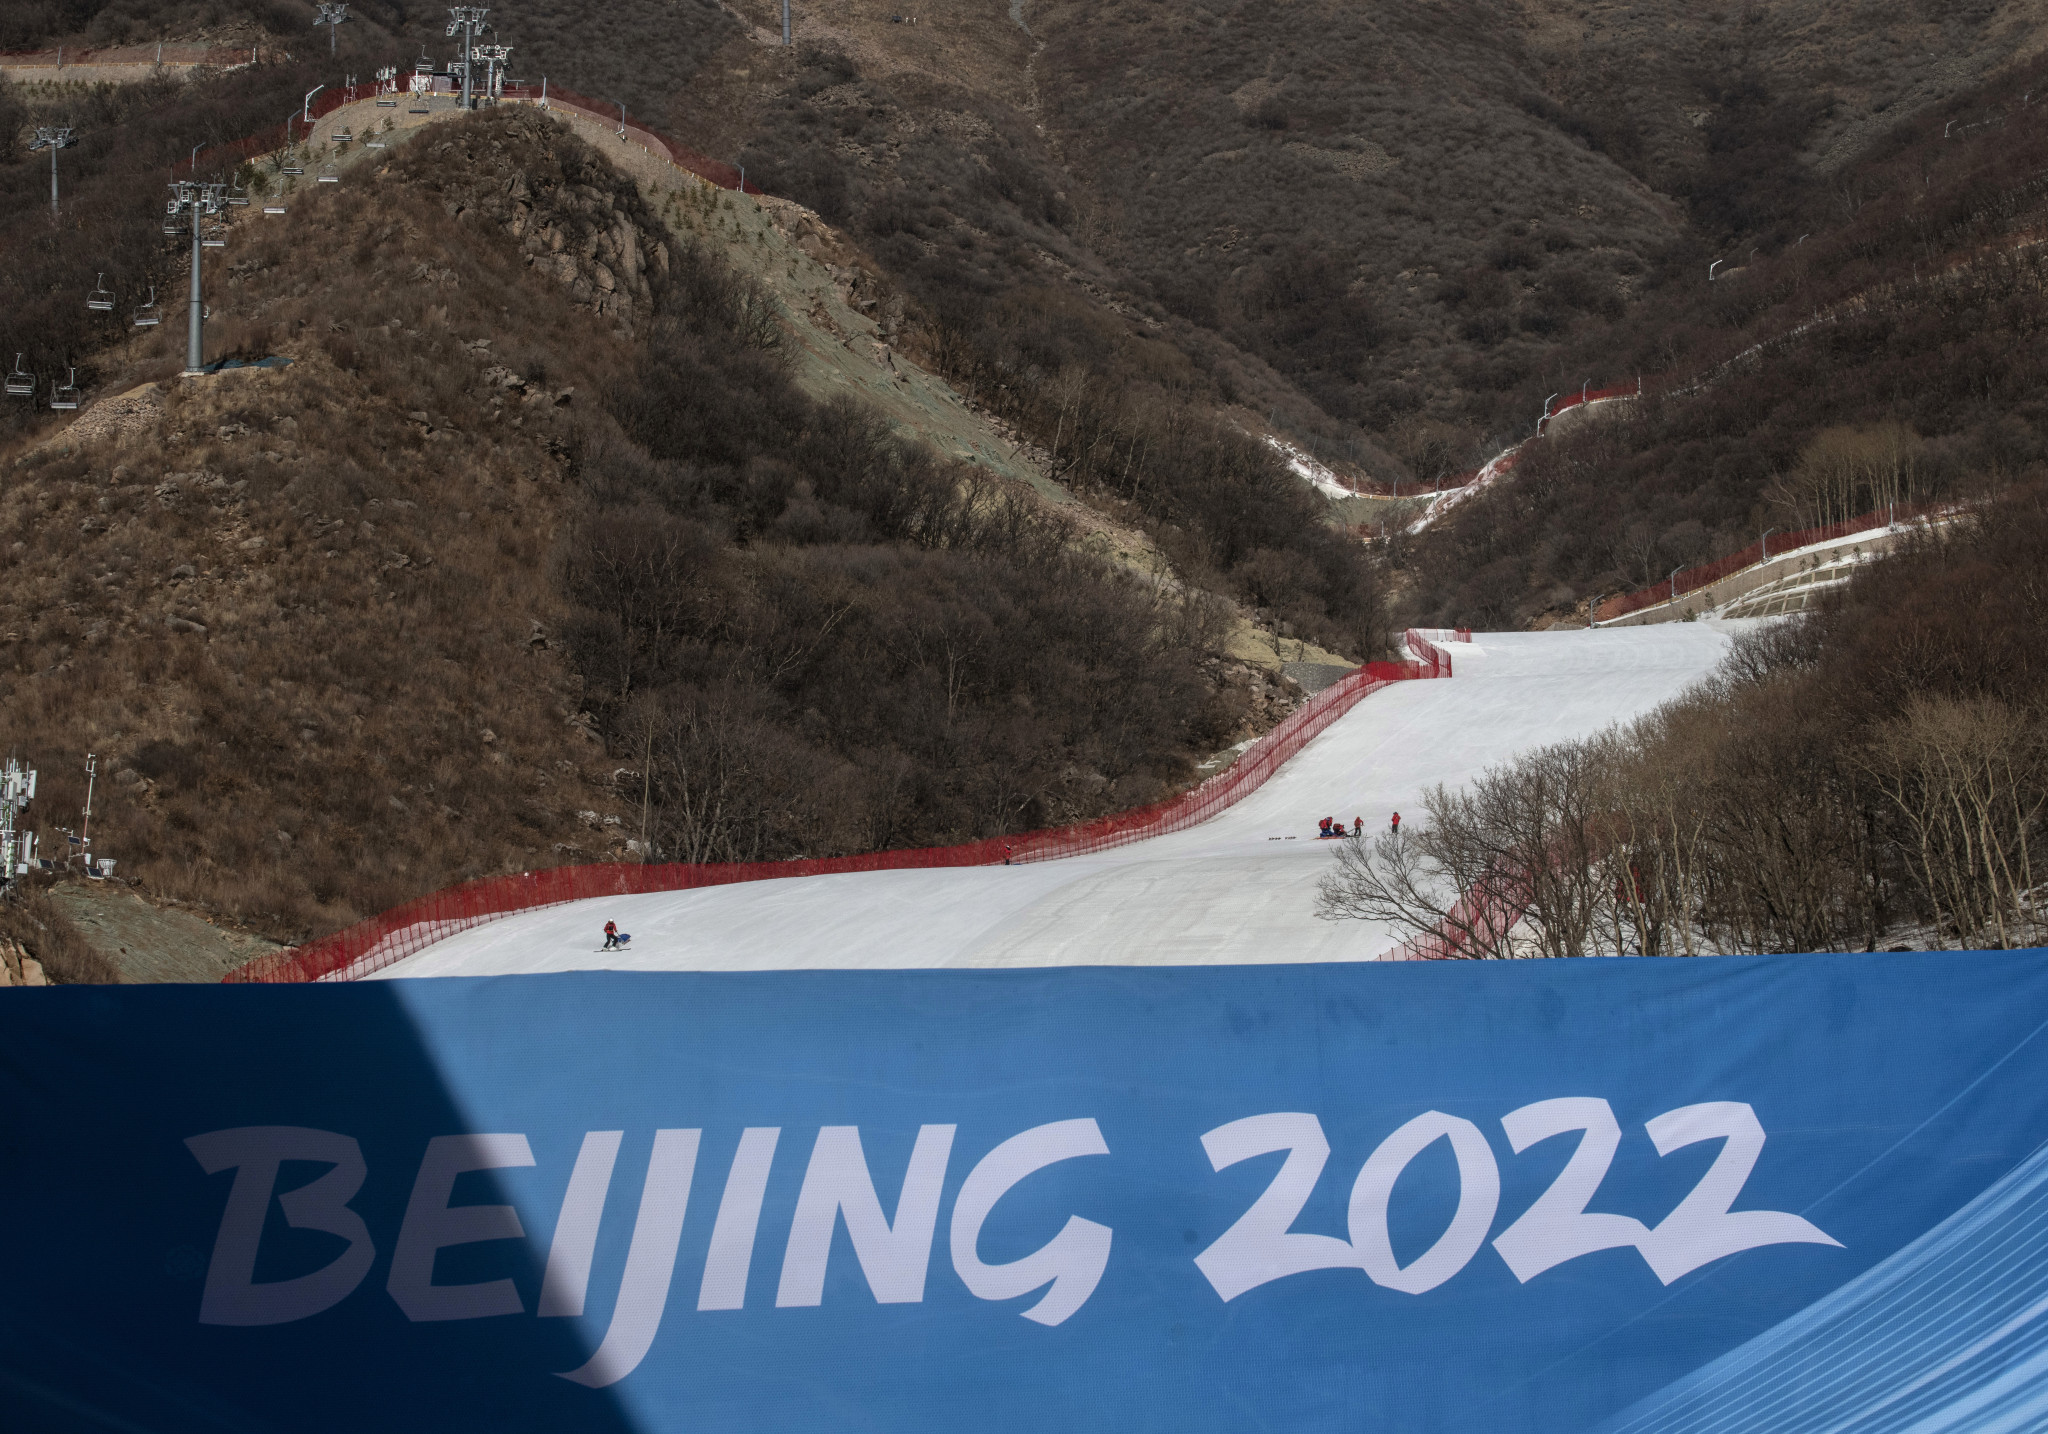 The IOC has expressed confidence in China's attempts to become established as a world-class destination for winter sports ©Getty Images
